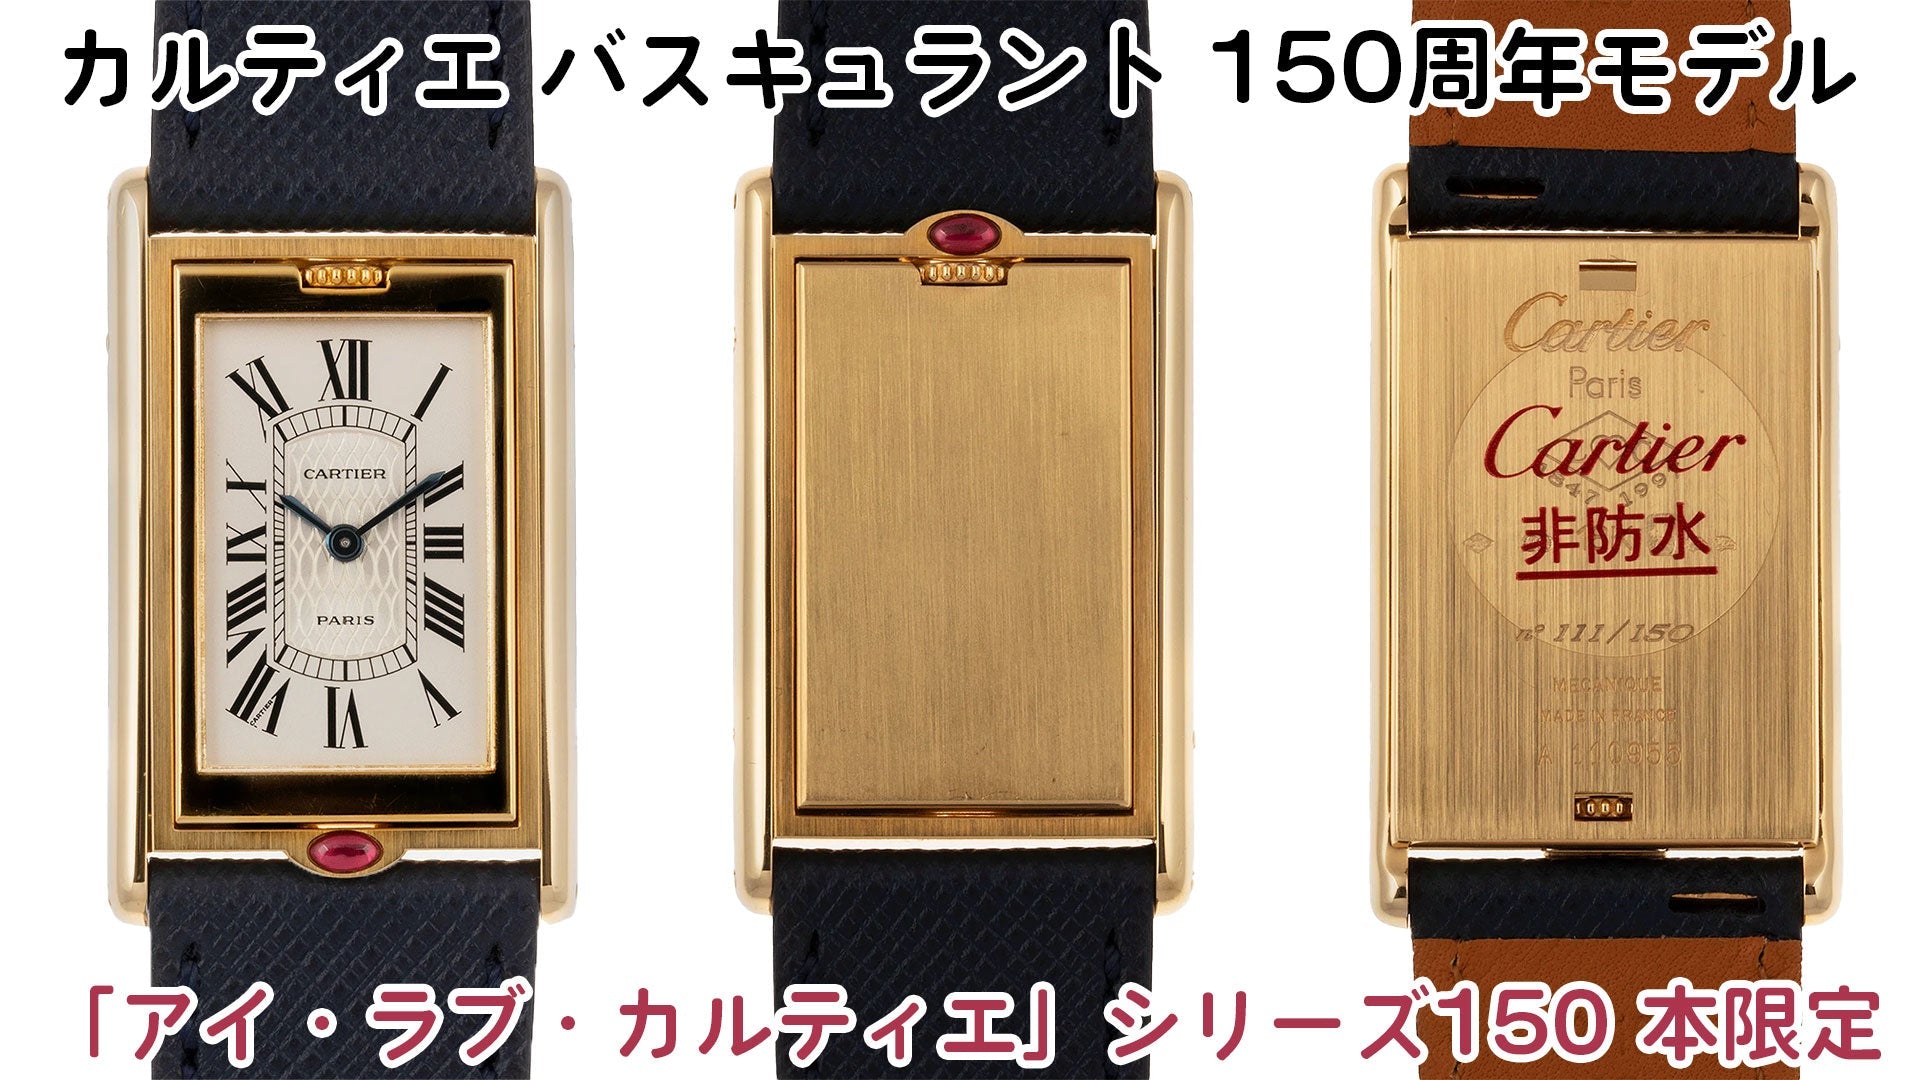 Cartier Watch Basculant 150th Anniversary Model